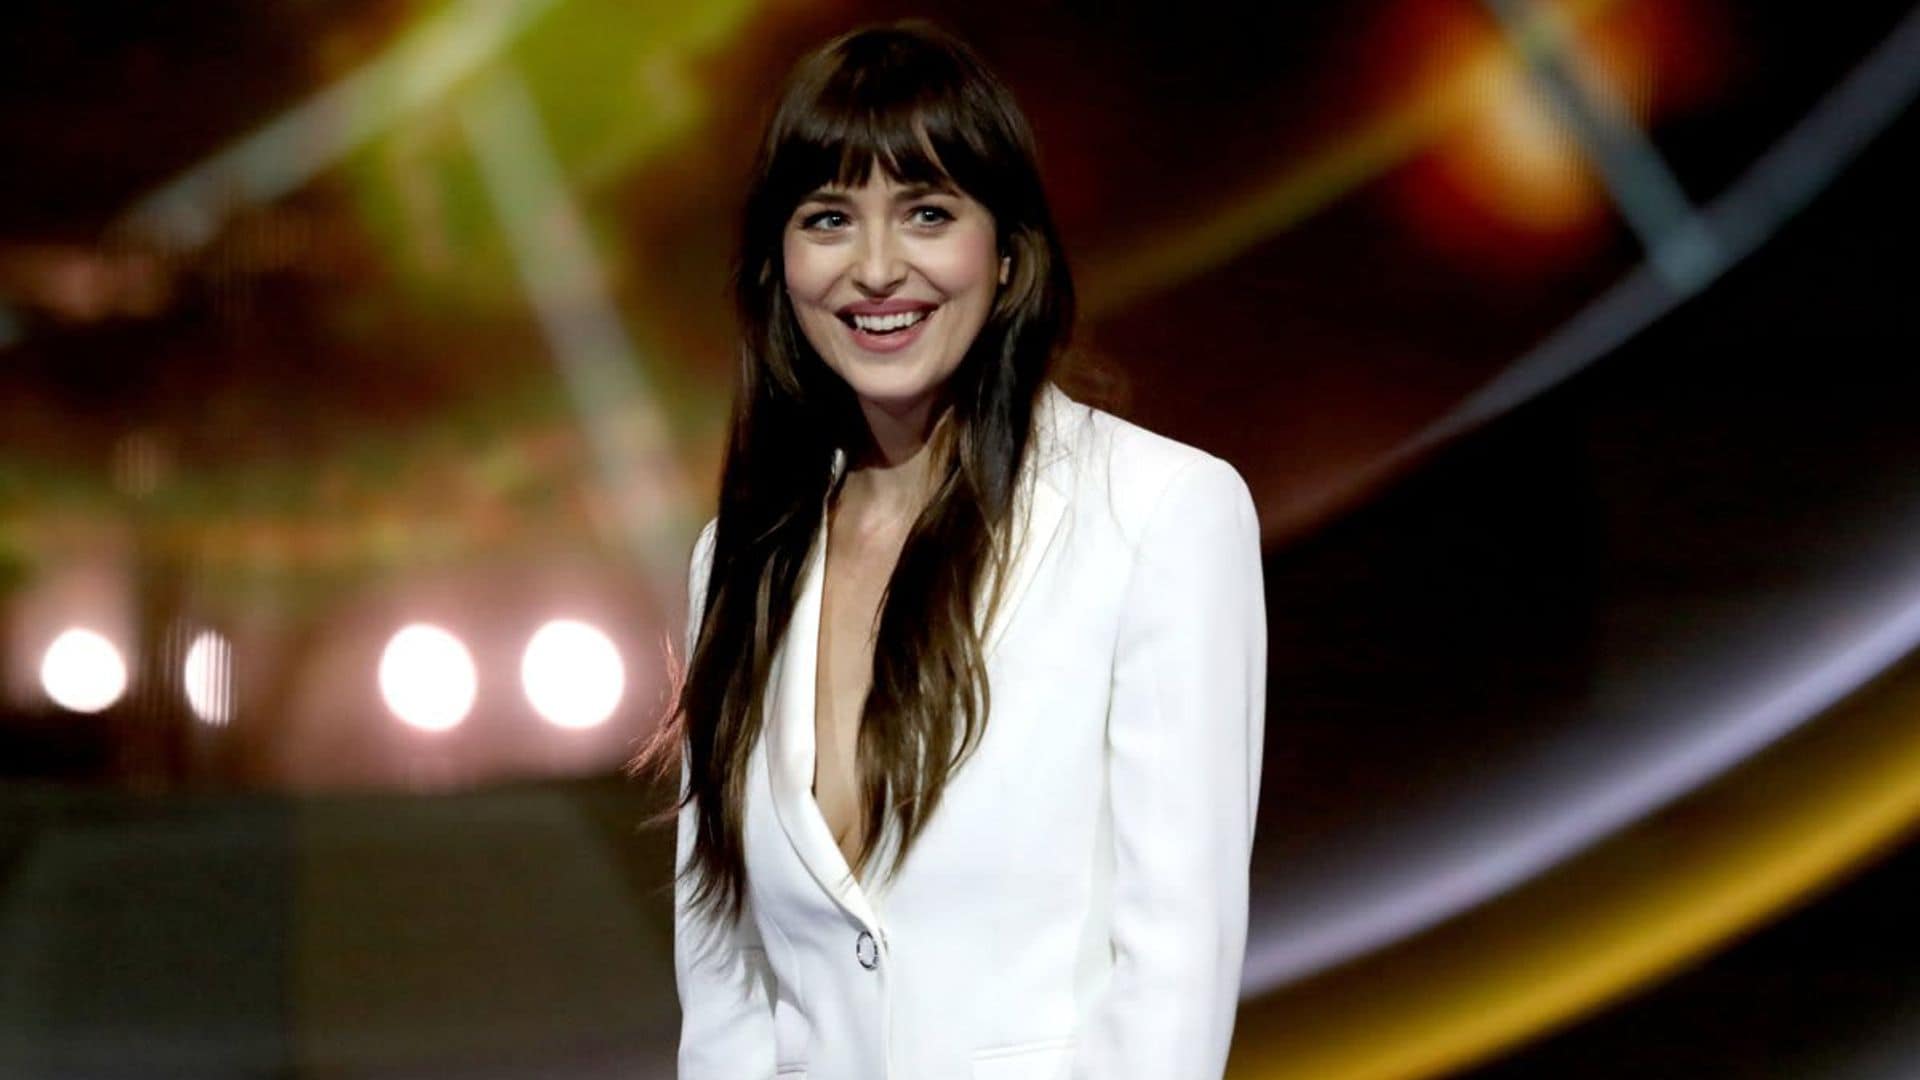 Dakota Johnson got cut off financially from her parents for a decision she made